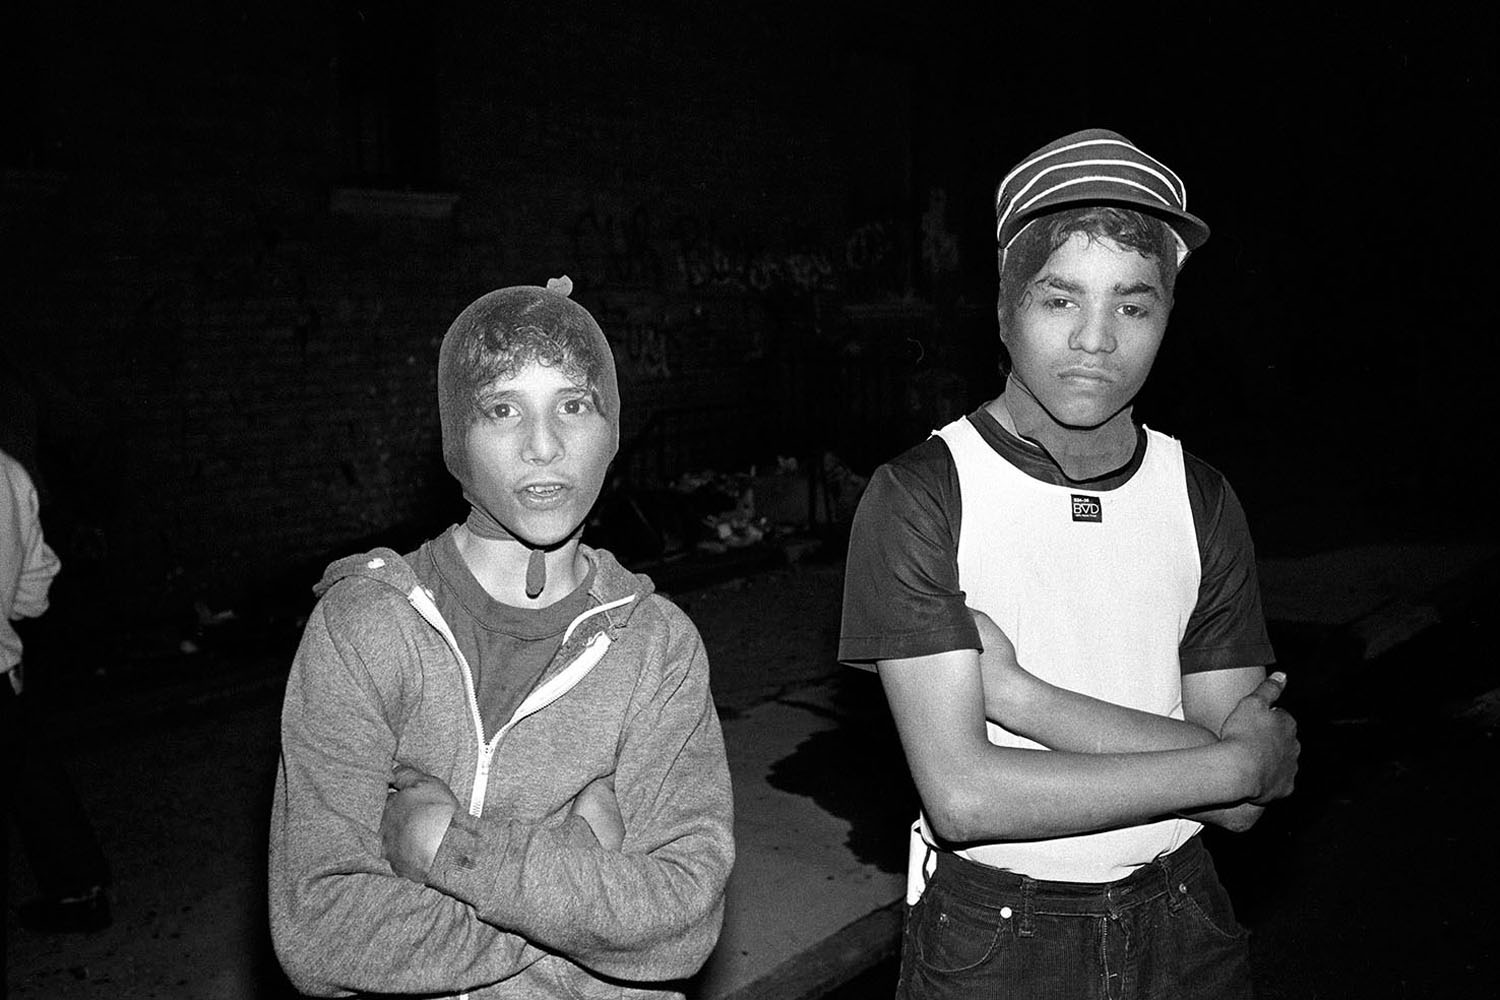 From Stephen Shames' Bronx Boys,  published by the University of Texas PressTwo teens wear stocking masks they use to hide their identity when they rob people. Bathgate Avenue, 1982